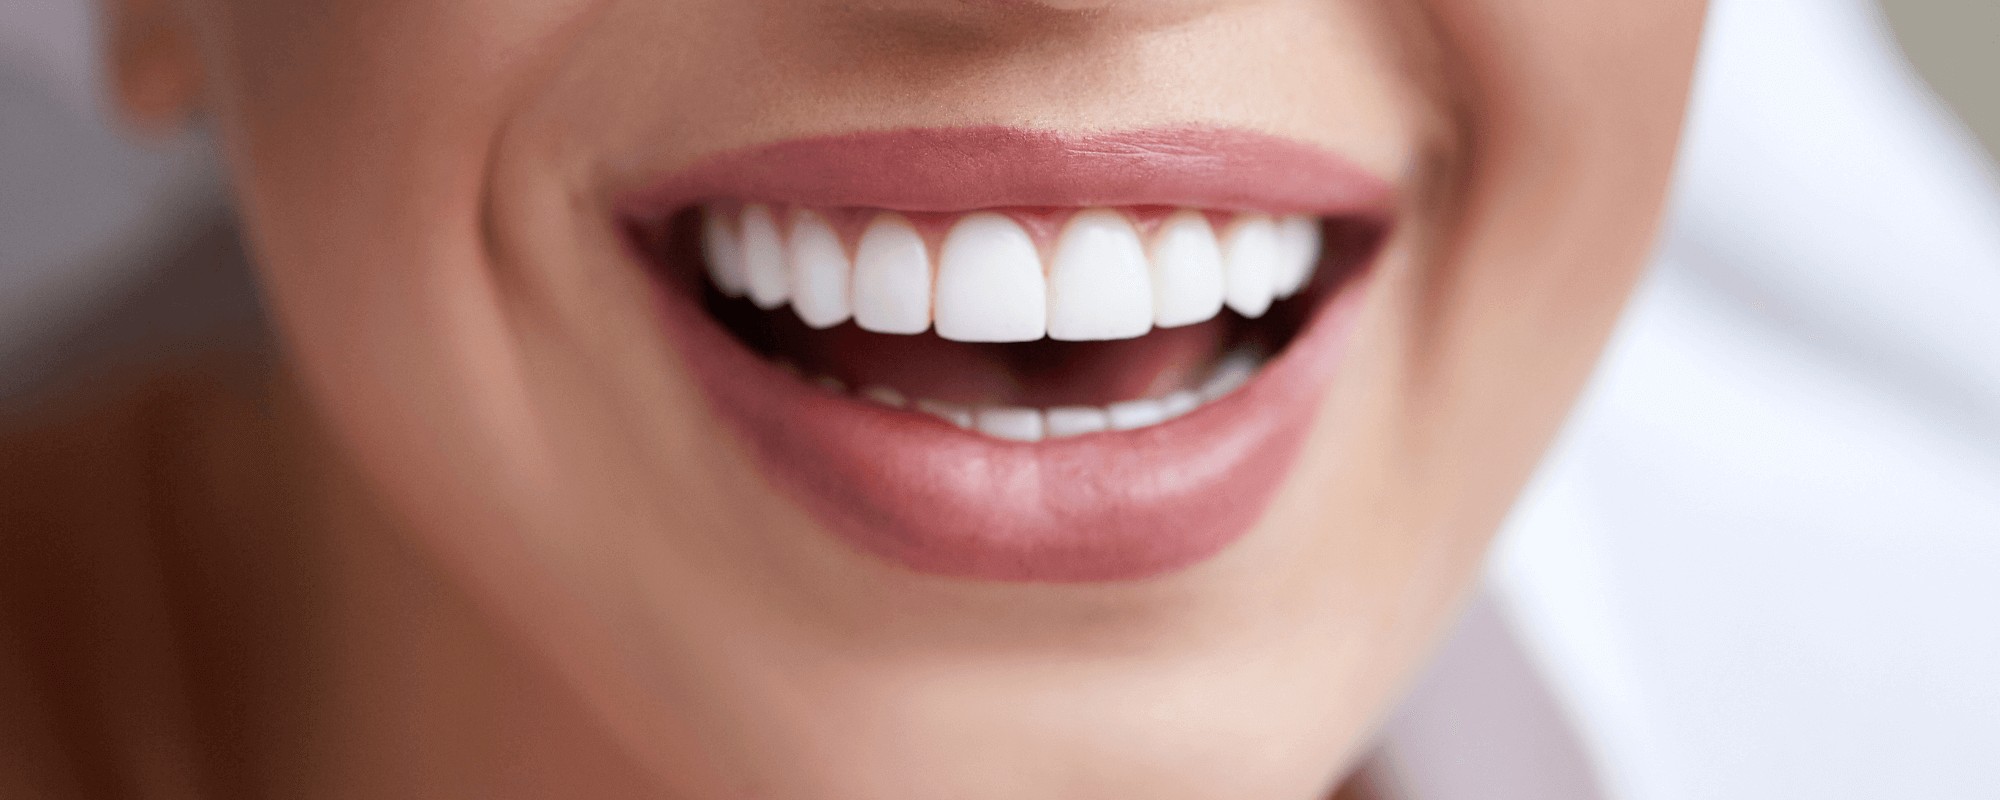 A close-up of a woman's bright white smile with dental implants, after choosing between the types of dental implants, smiling towards the camera here at Stella Dental in Staffordshire.